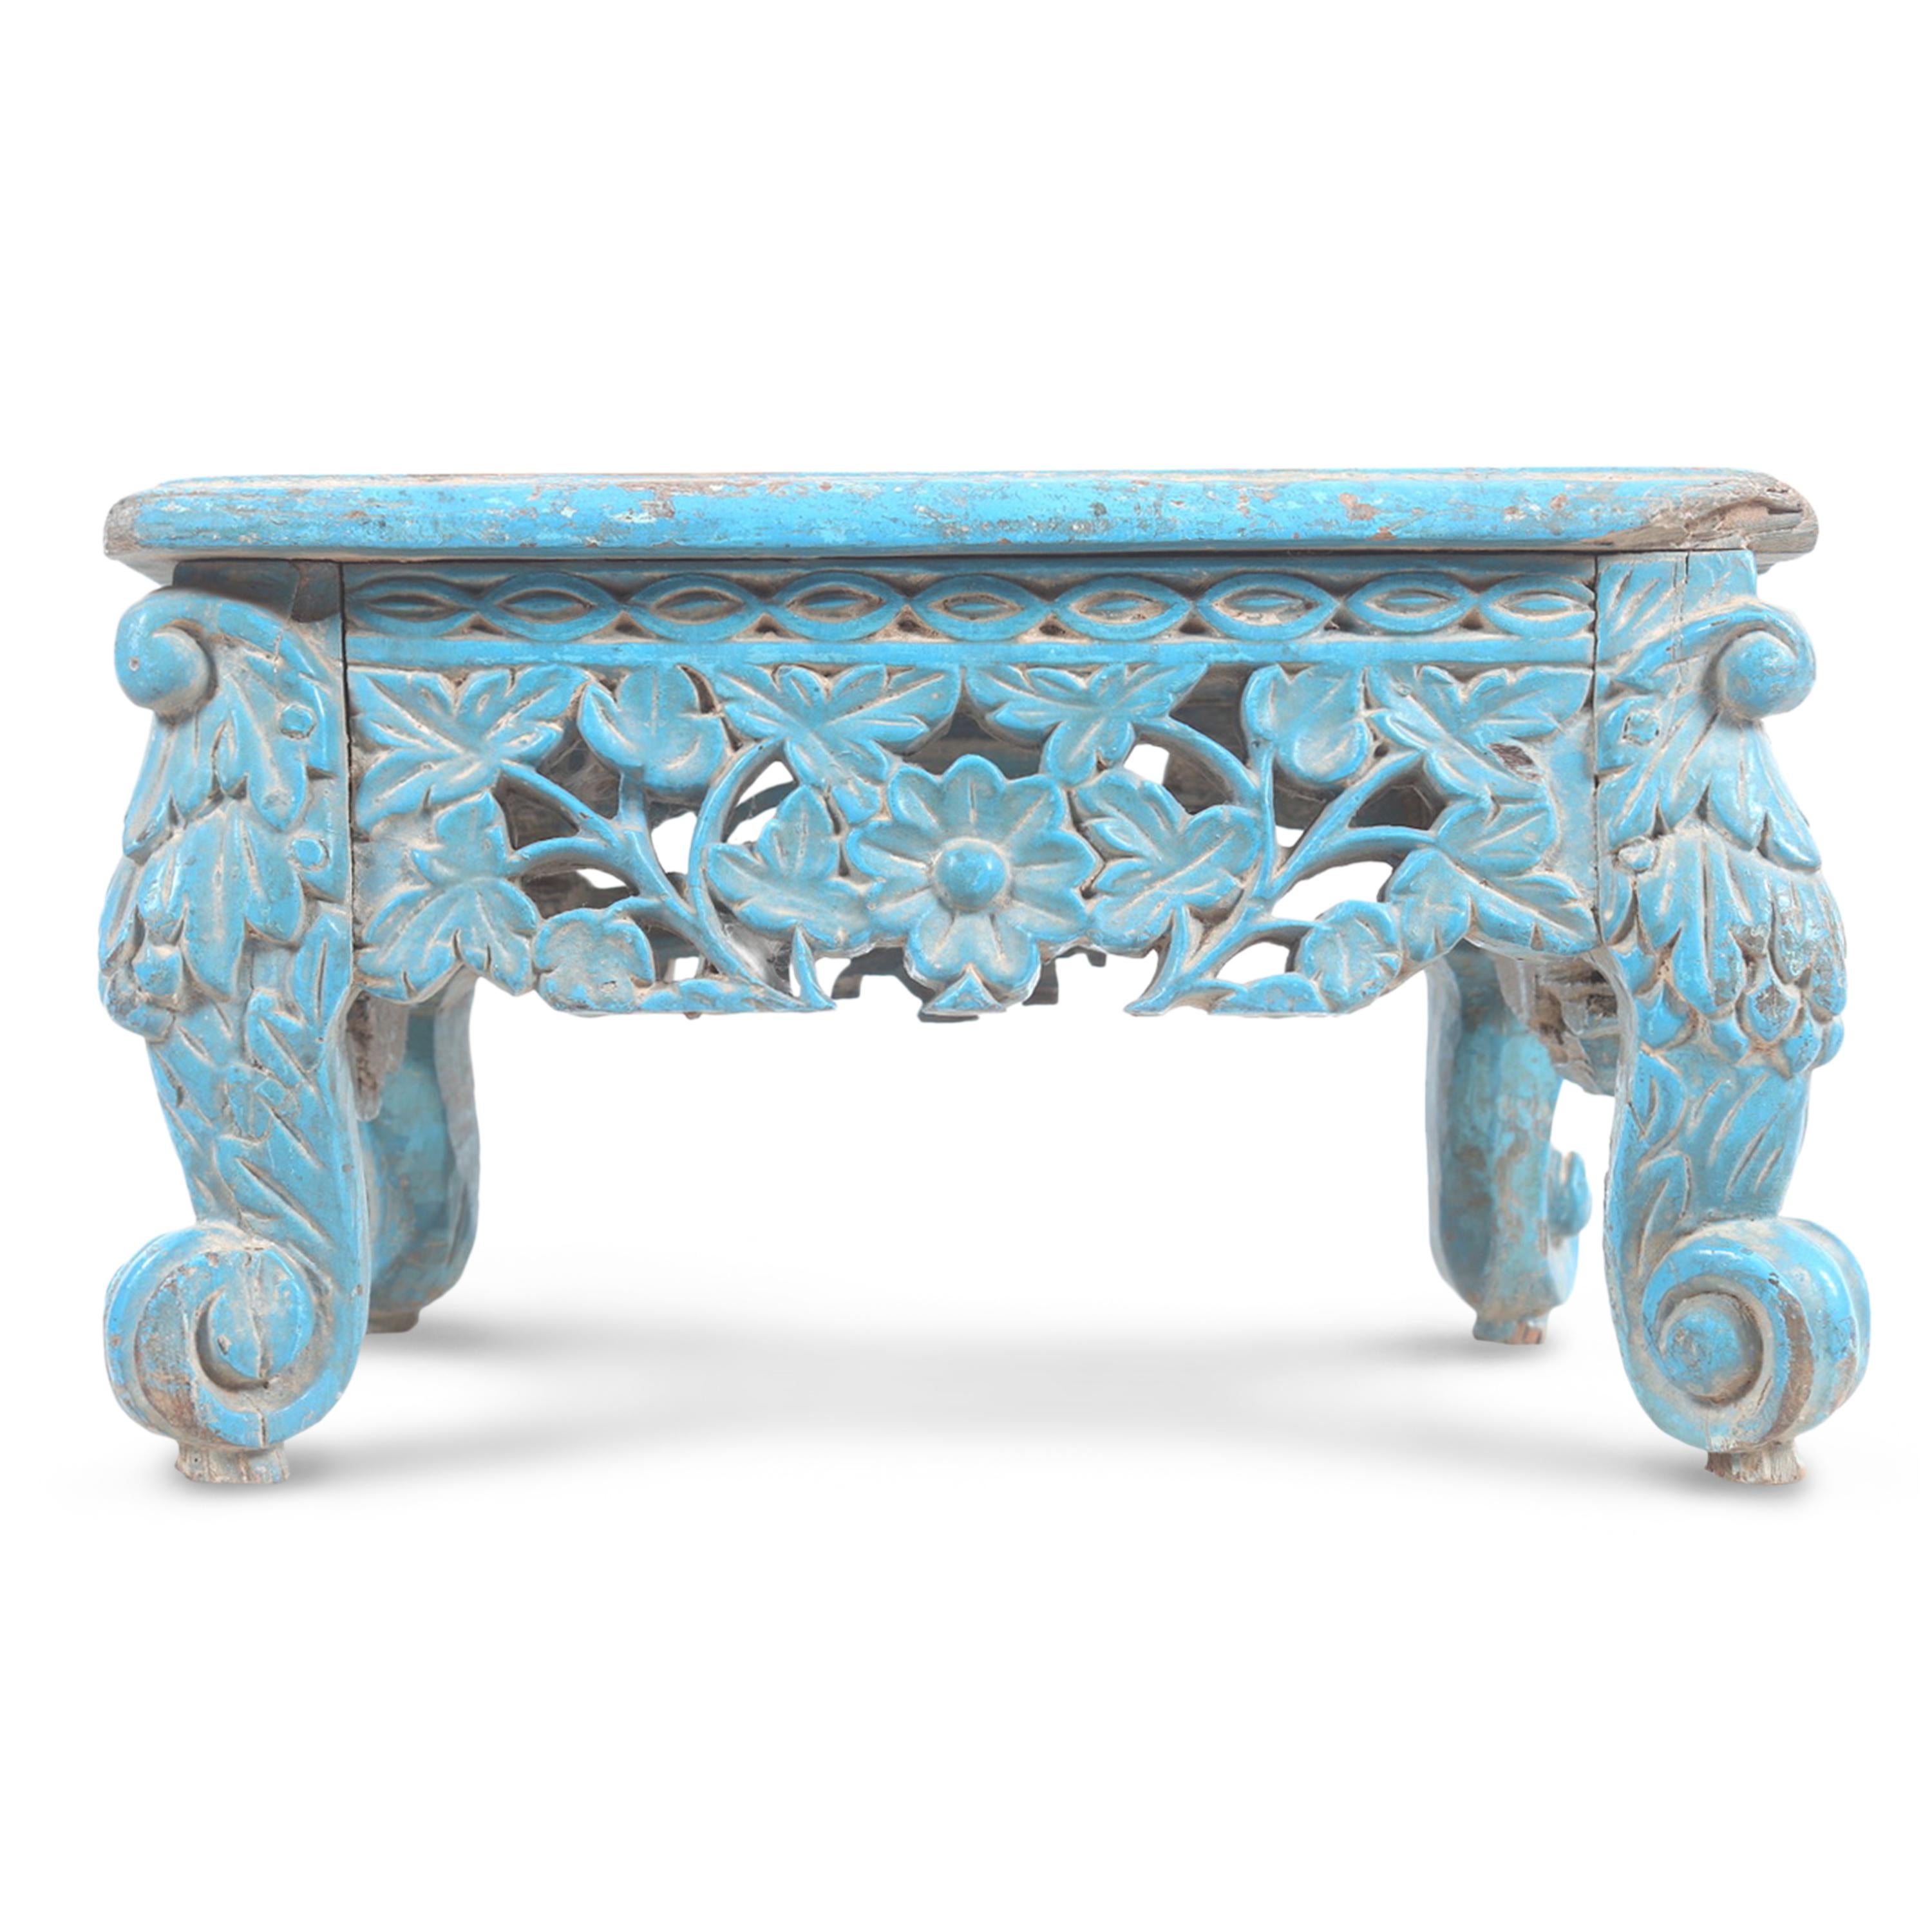 A unique Anglo-Indian Teakwood Carved Table/Stool. Its original blue paint, exceptionally carved details, and weathered patina give this piece a distinct personality.